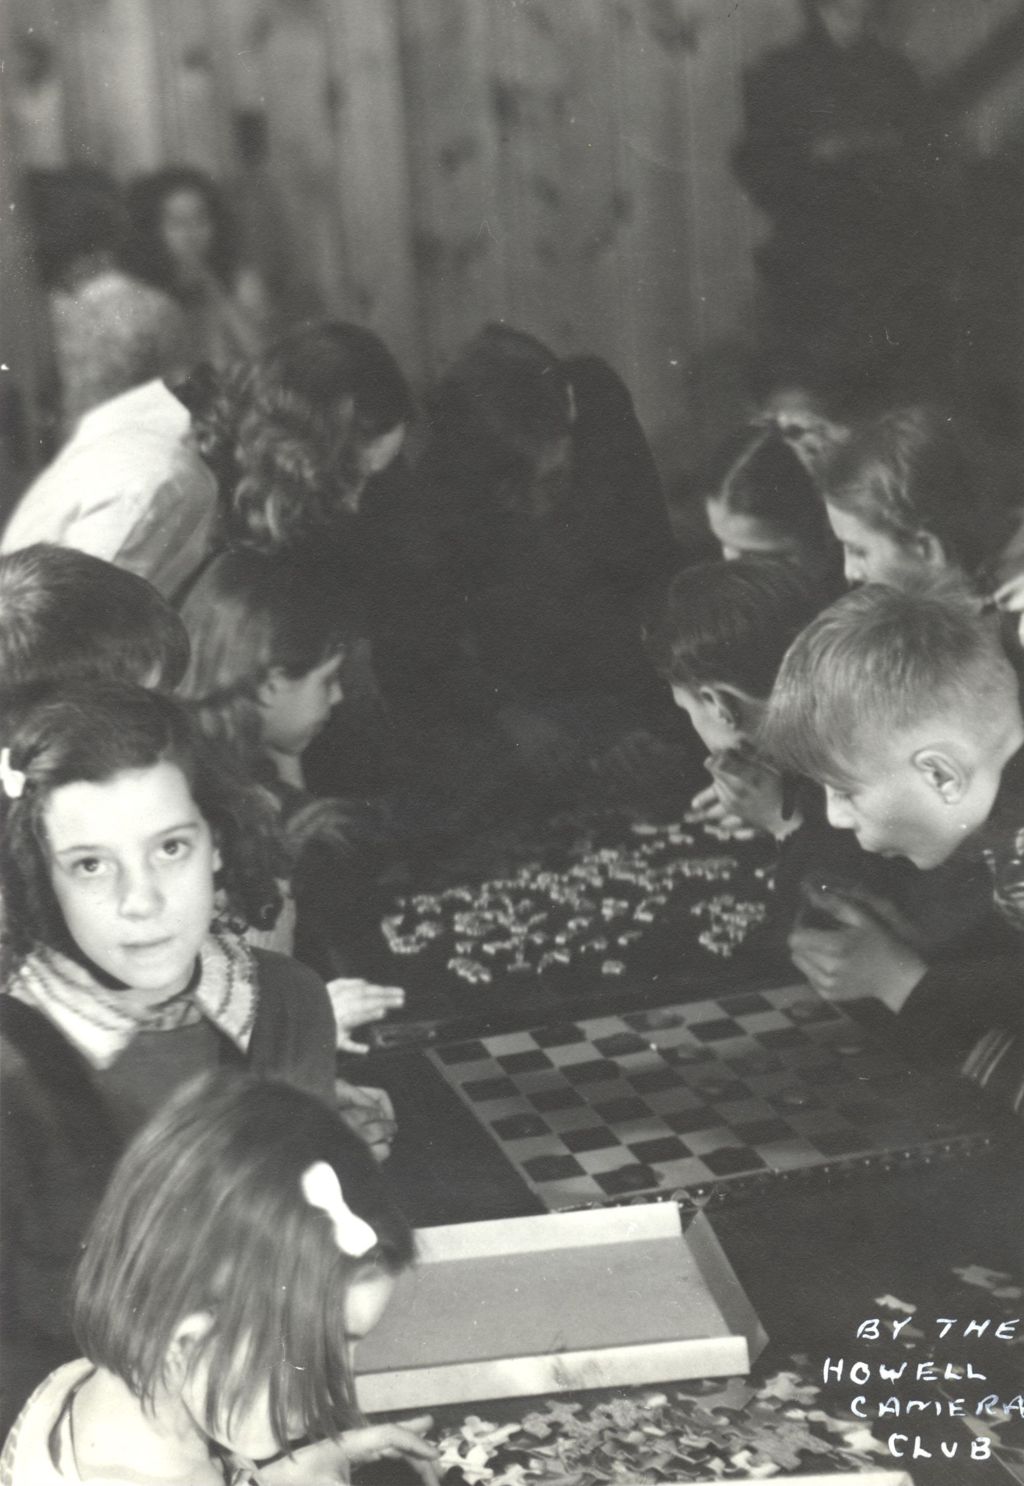 Miniature of Children playing checkers and doing puzzles